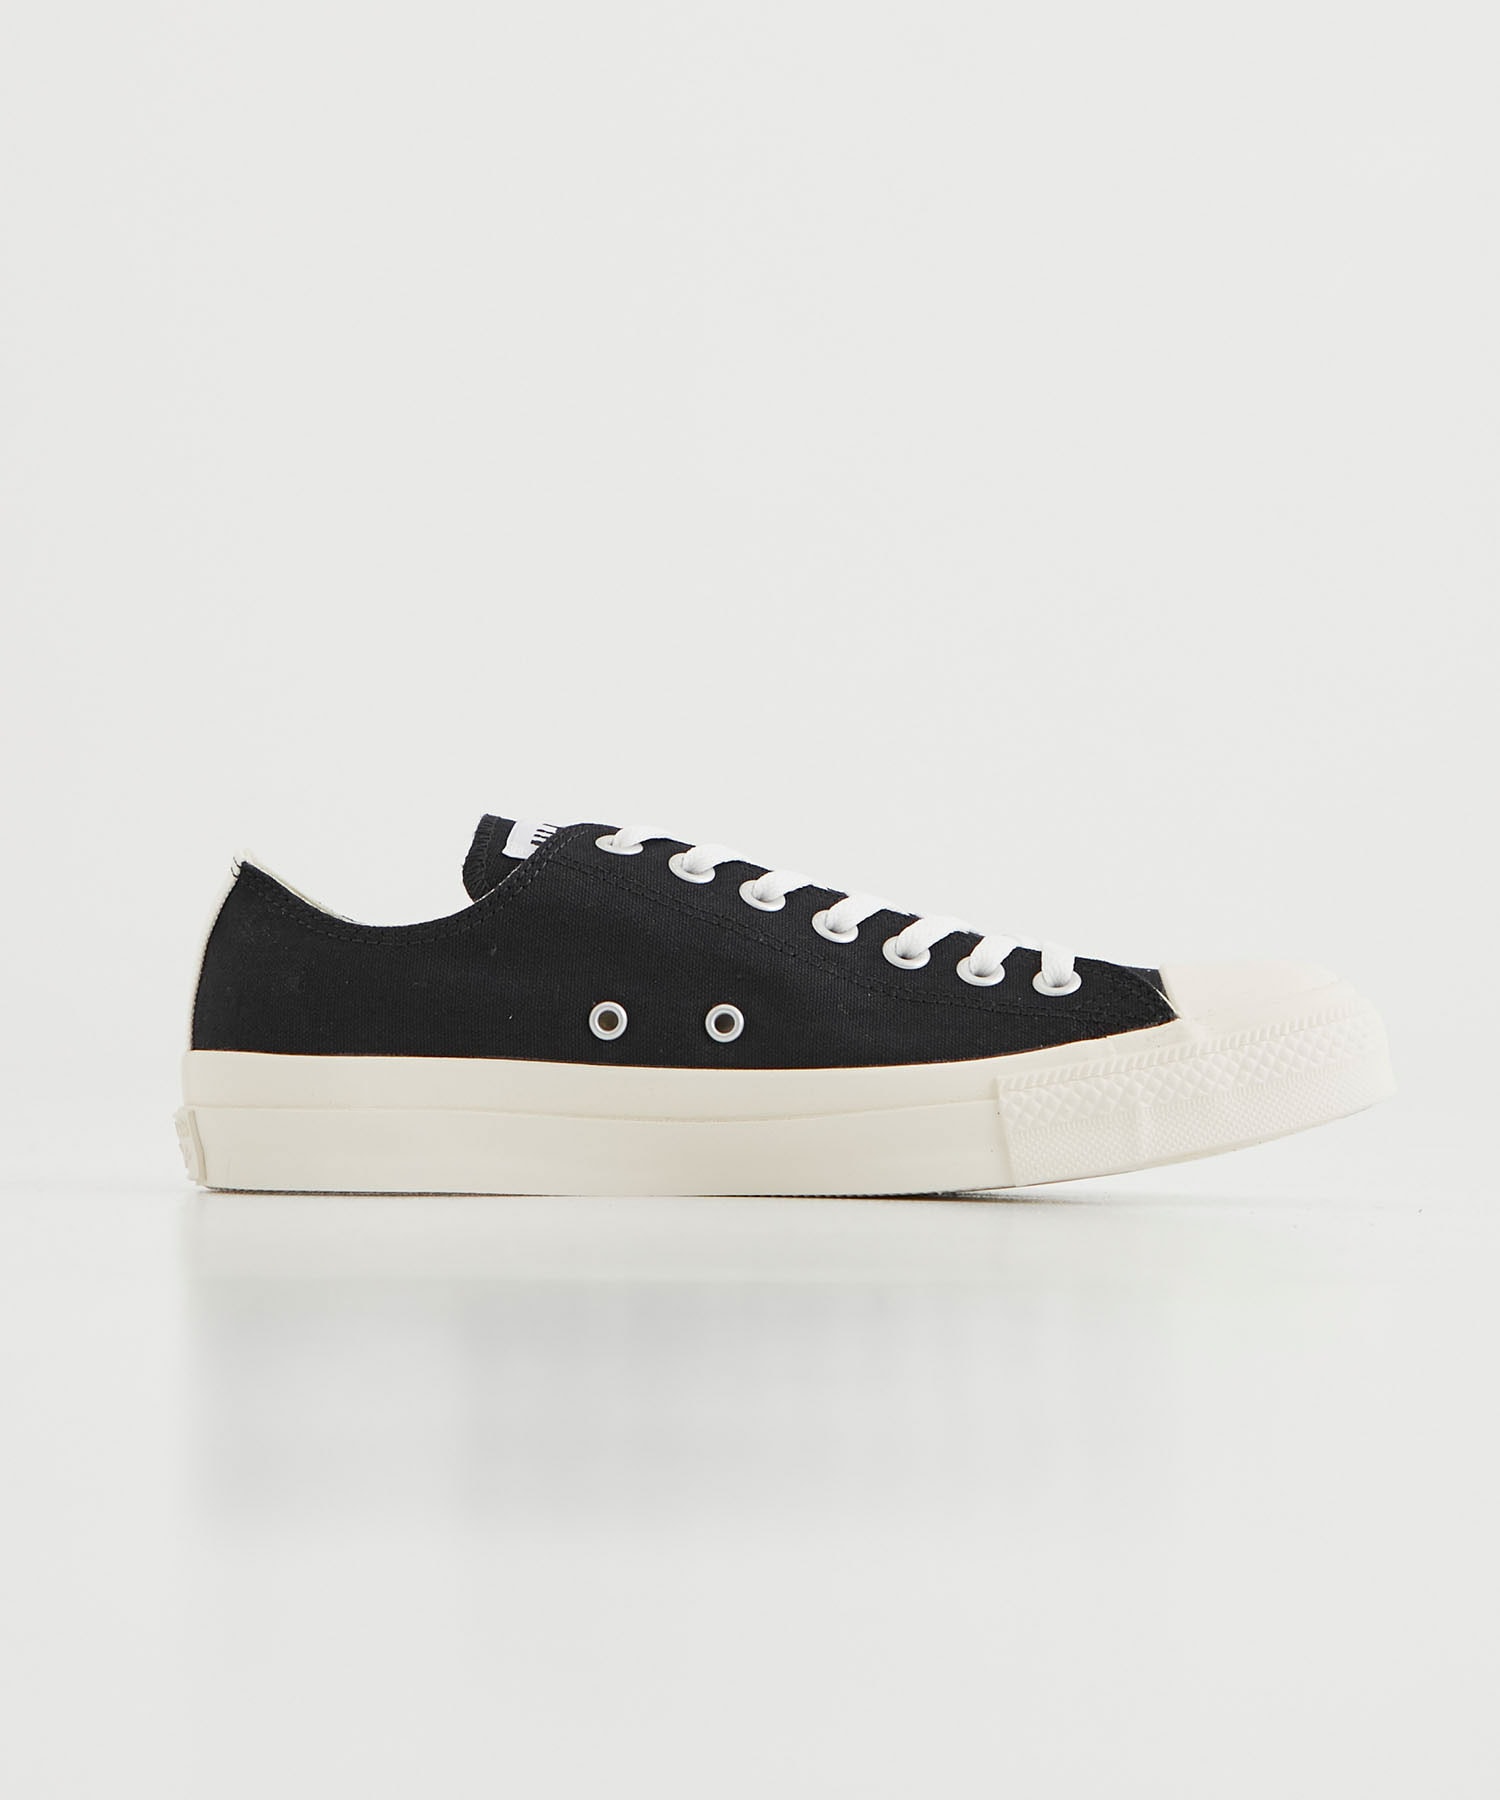 PLAY CONVERSE CHUCK TAYLOR Allstar Low PLAY Comme des Garcons